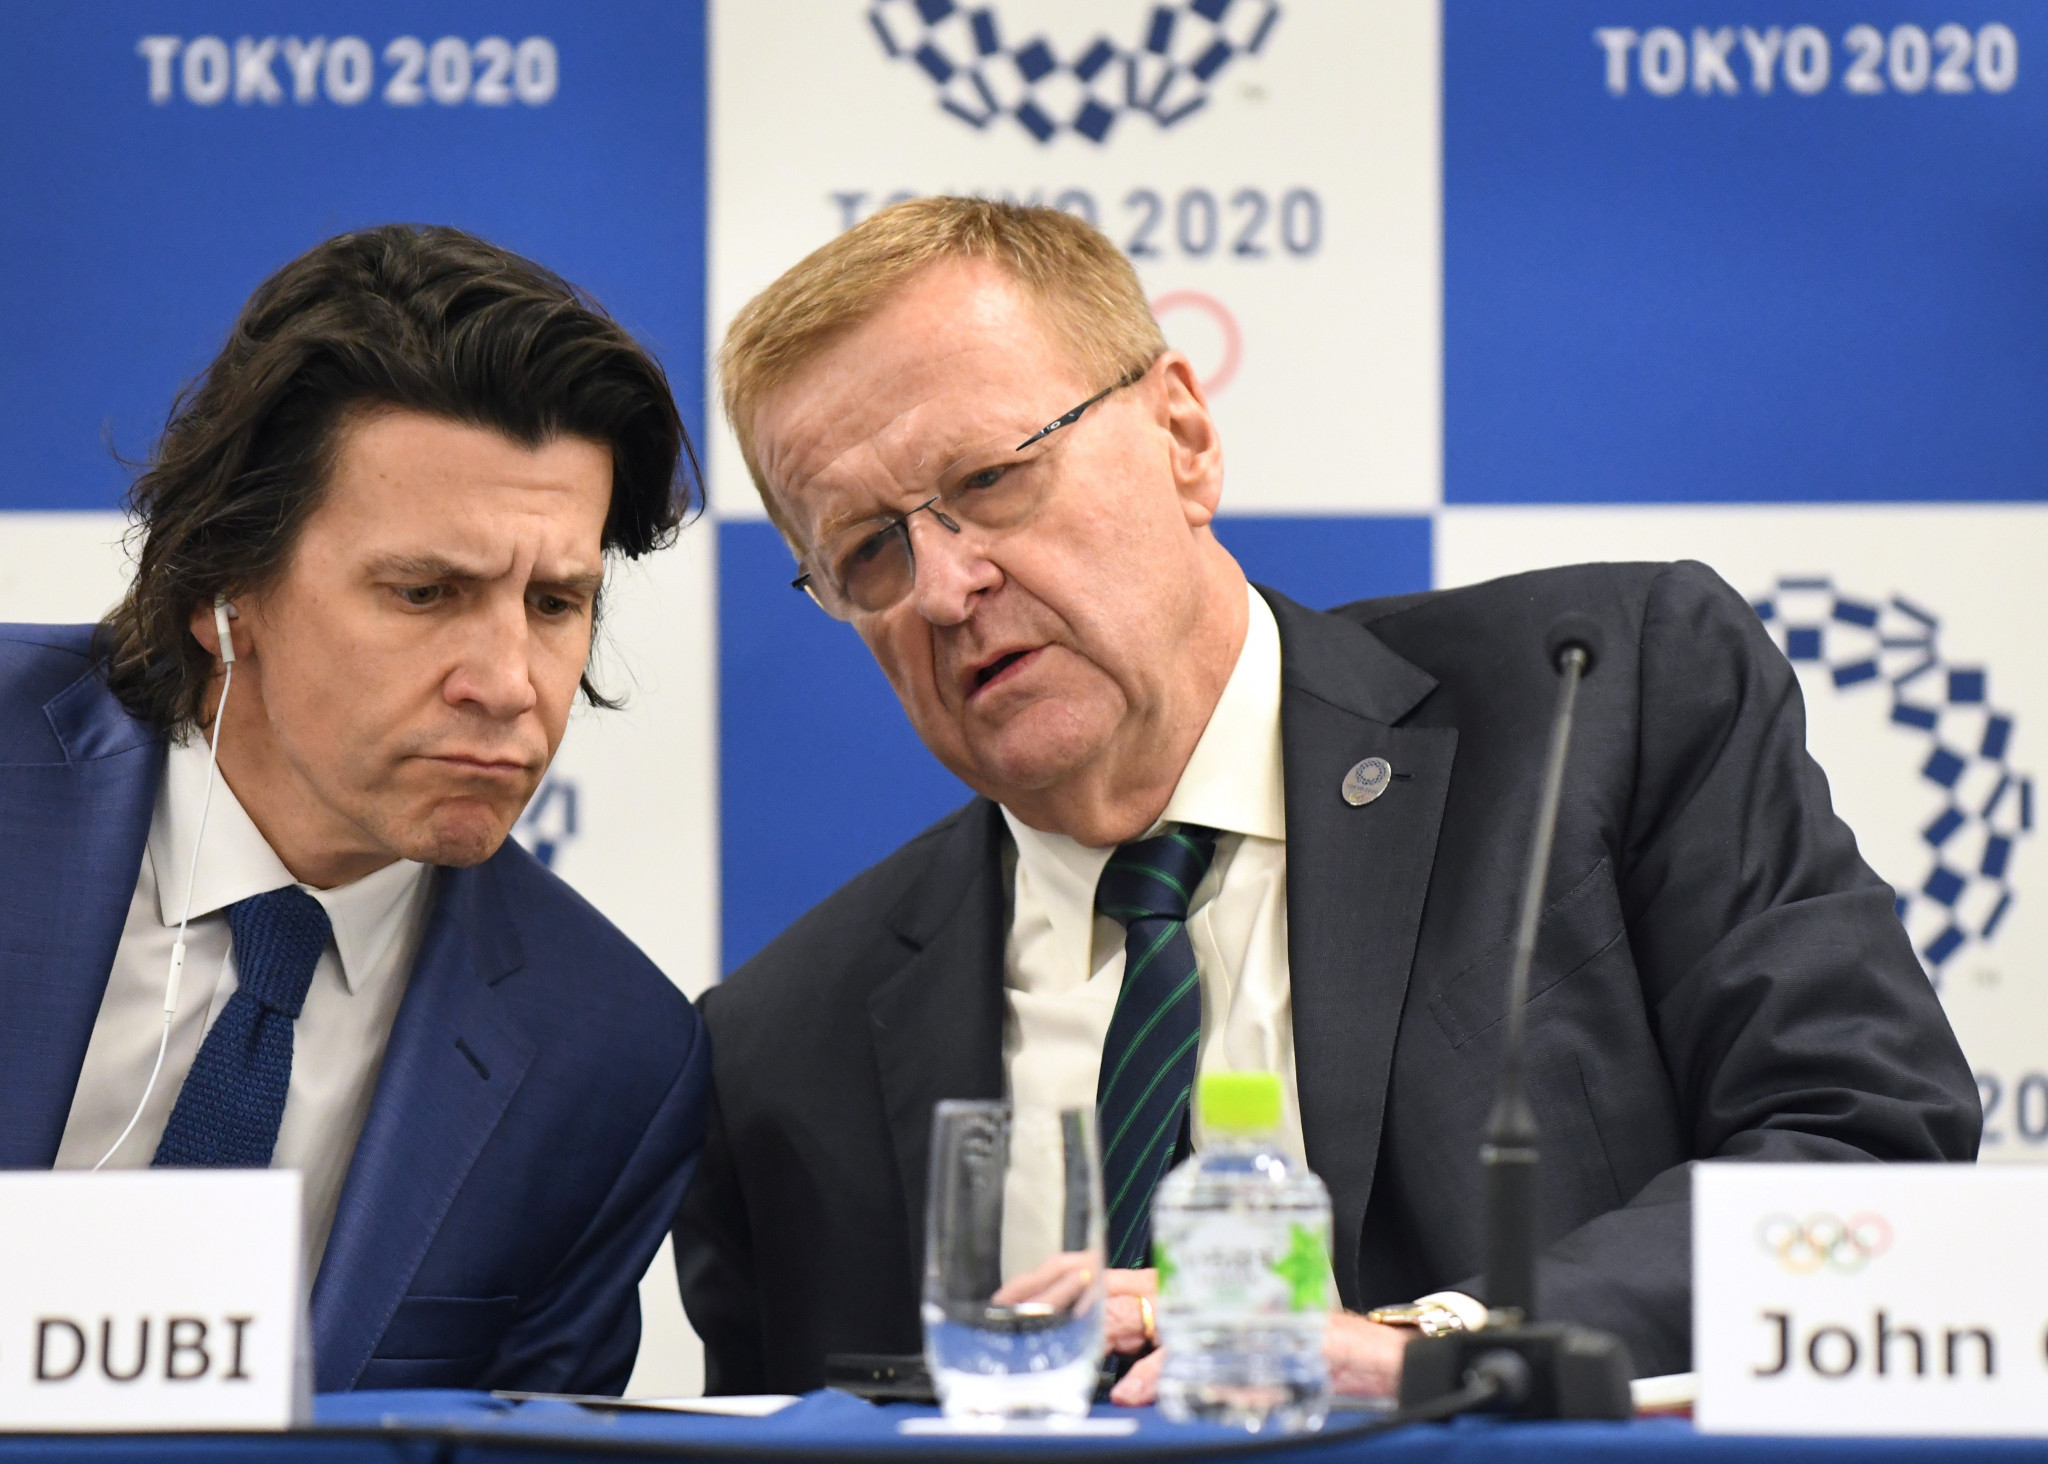 The IOC Coordination Commission for Tokyo 2020 is led by John Coates, right ©Getty Images